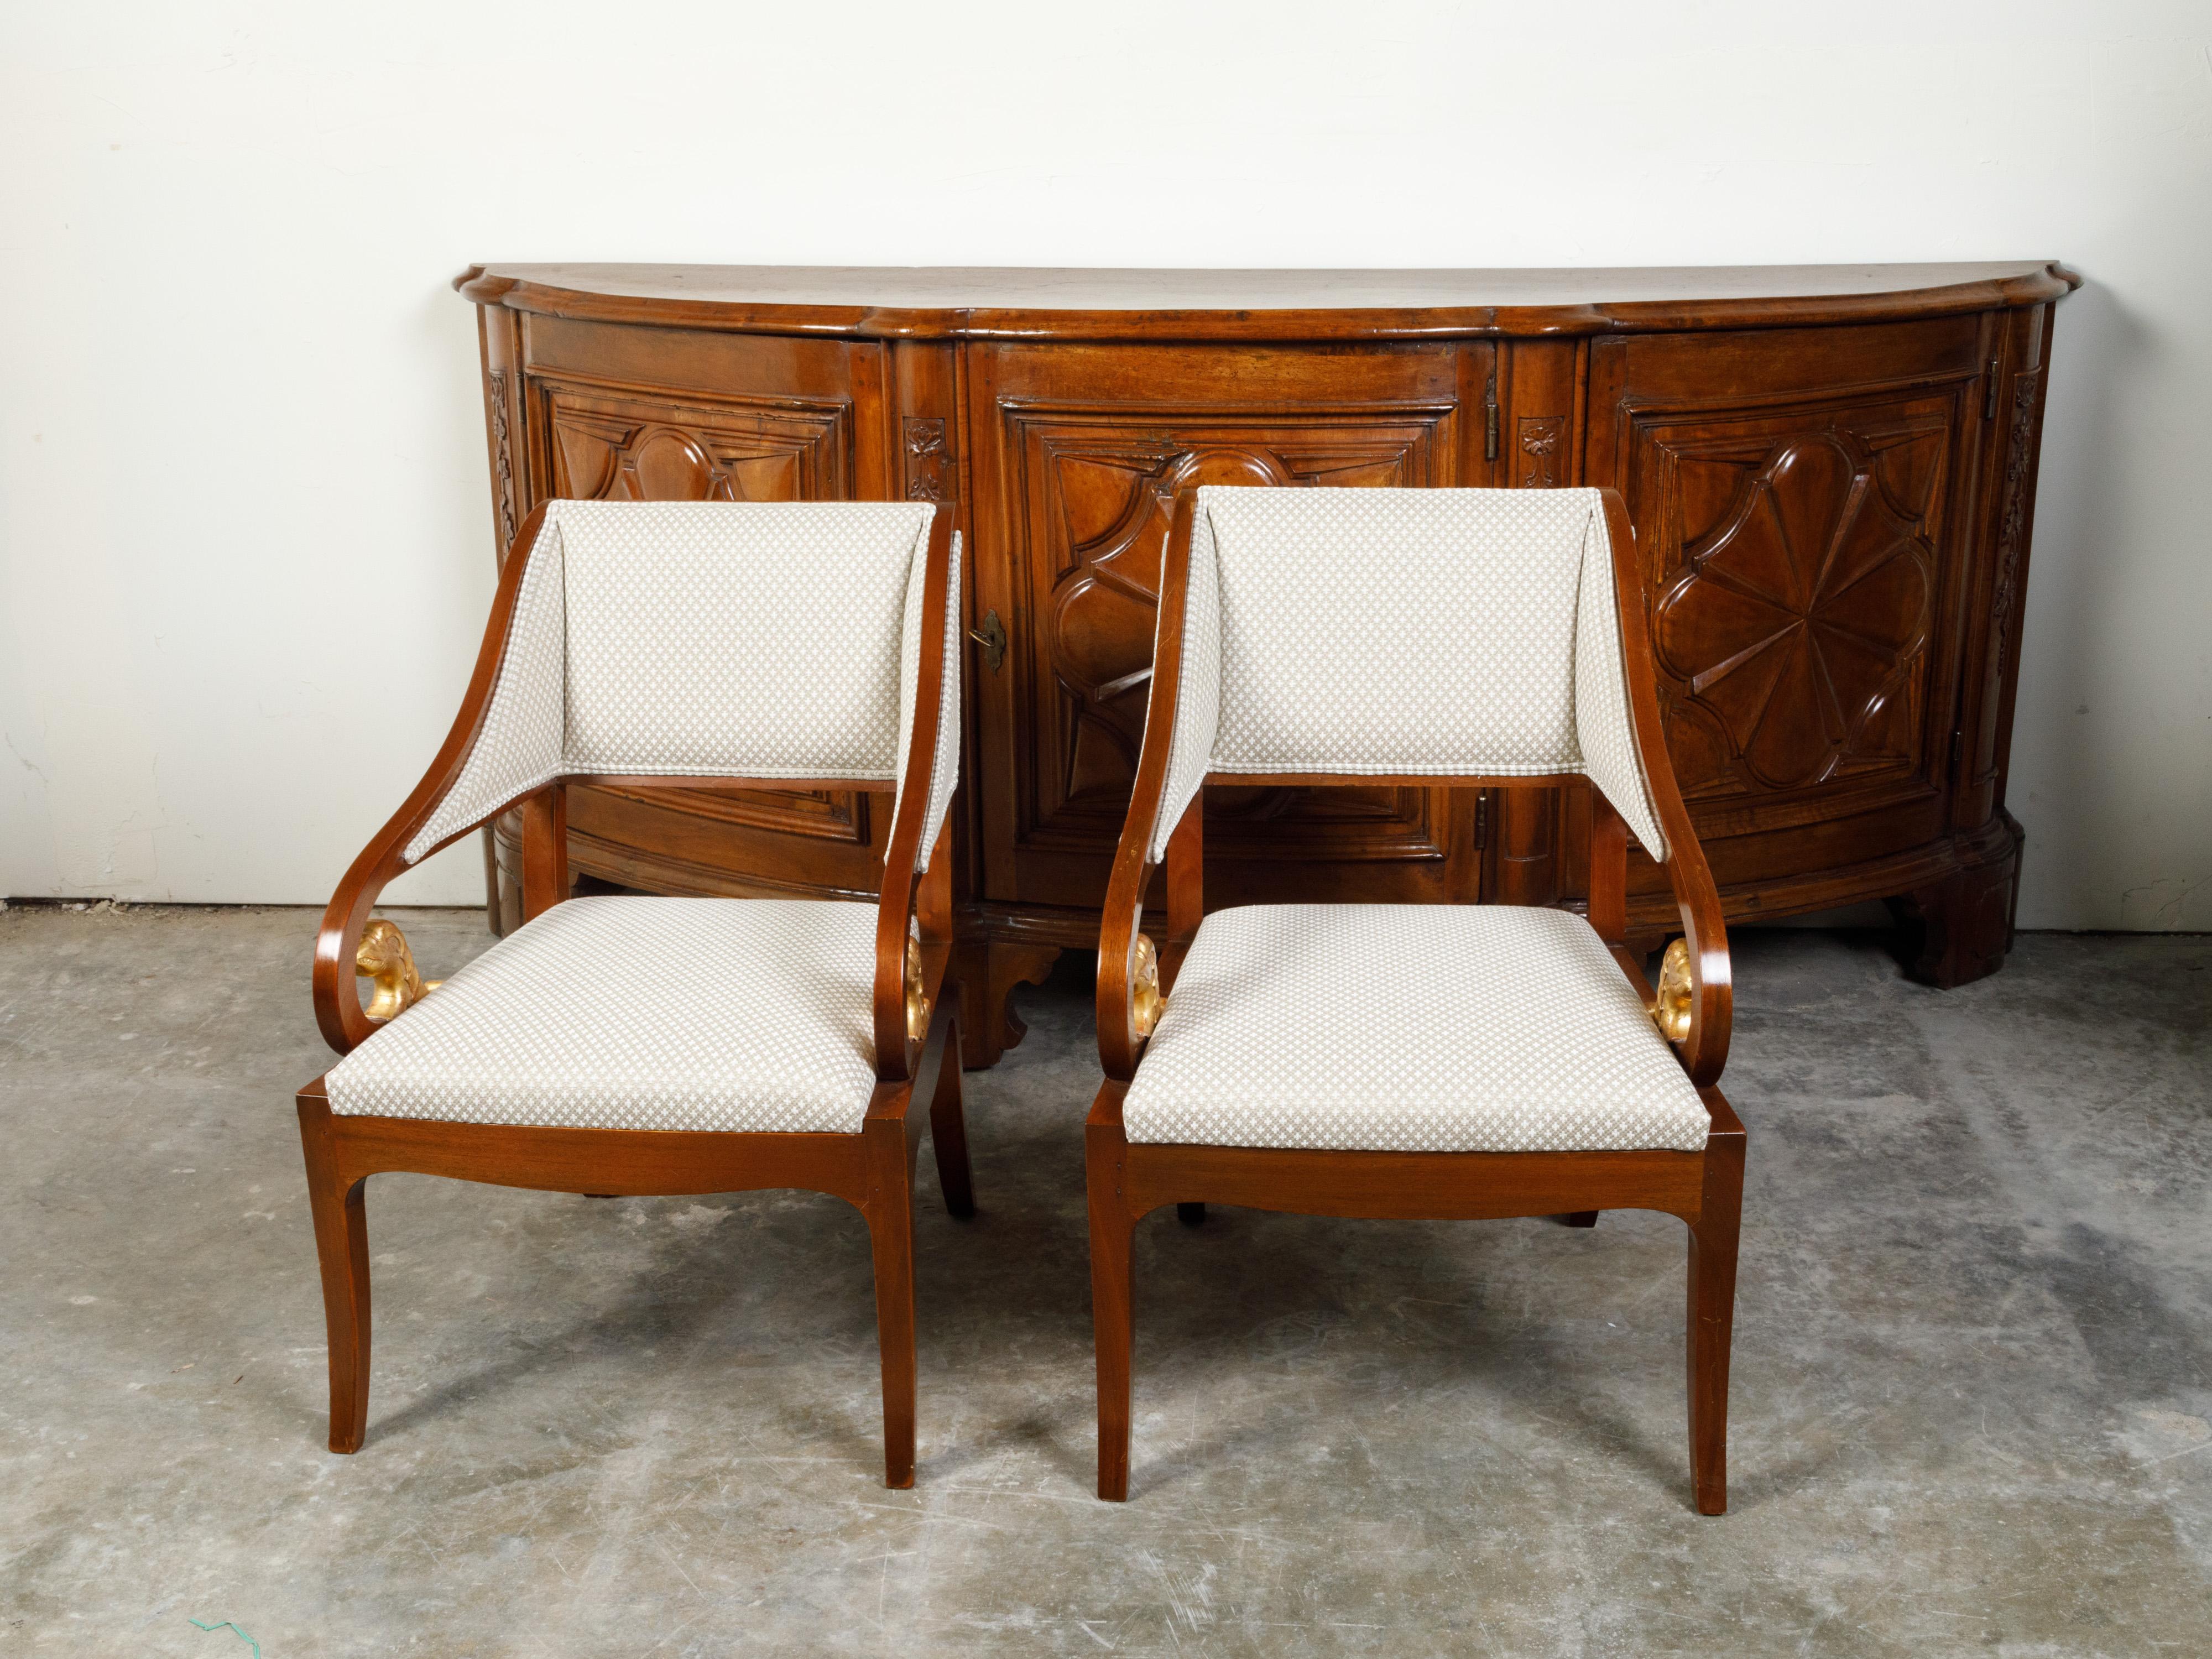 A pair of French walnut armchairs from the 19th century, with giltwood mythical animal carvings and quatrefoil upholstery. Created in France during the 19th century, each of this pair of walnut armchairs features an out-scrolling back connected to